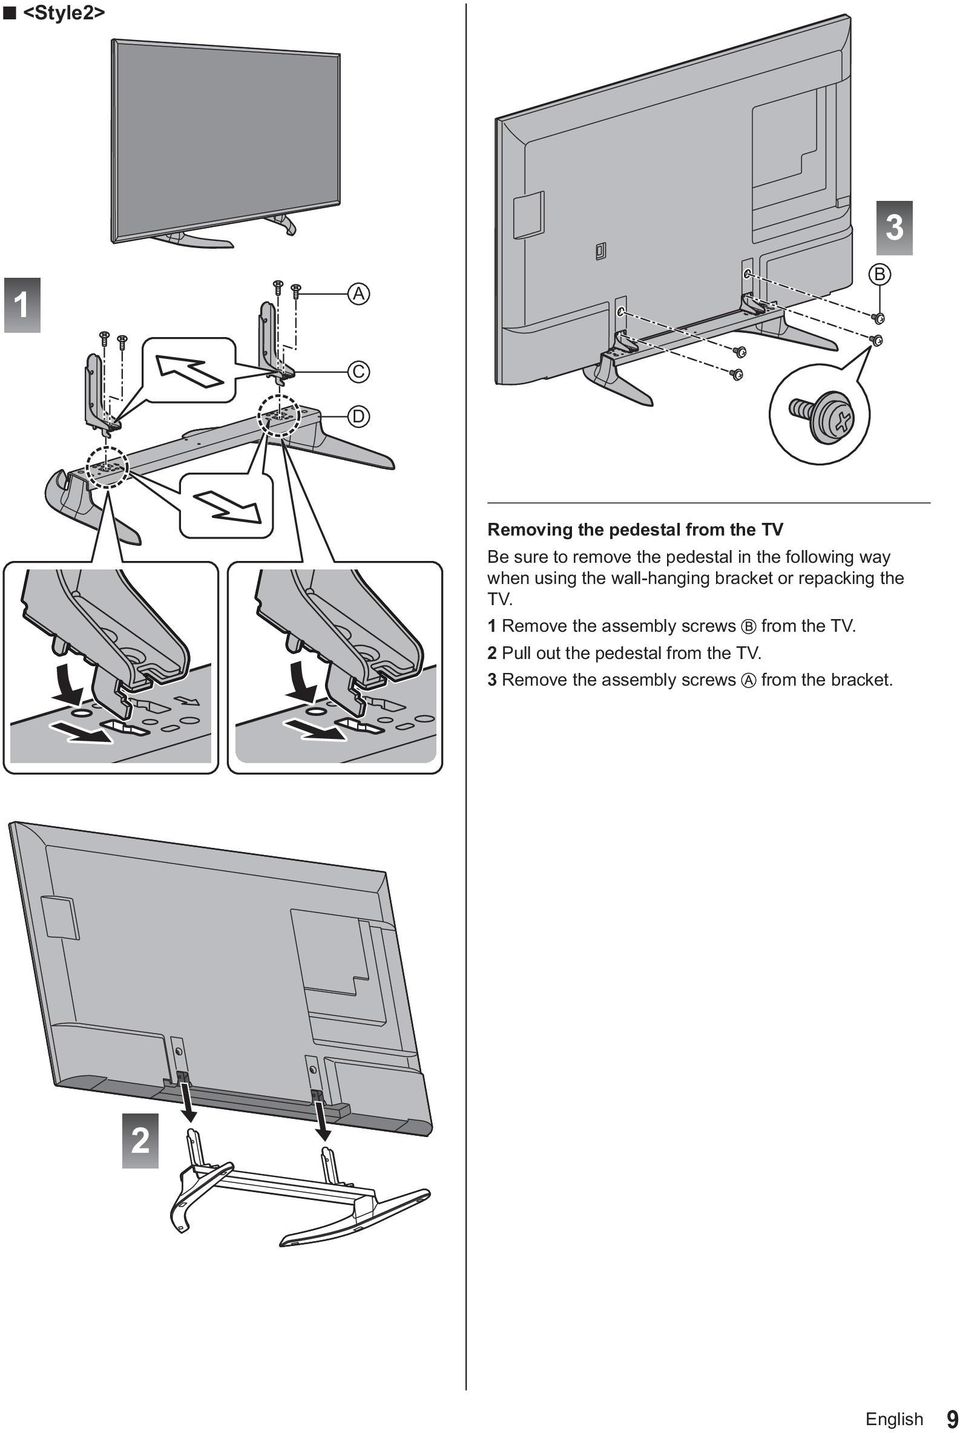 repacking the TV. 1 Remove the assembly screws from the TV.